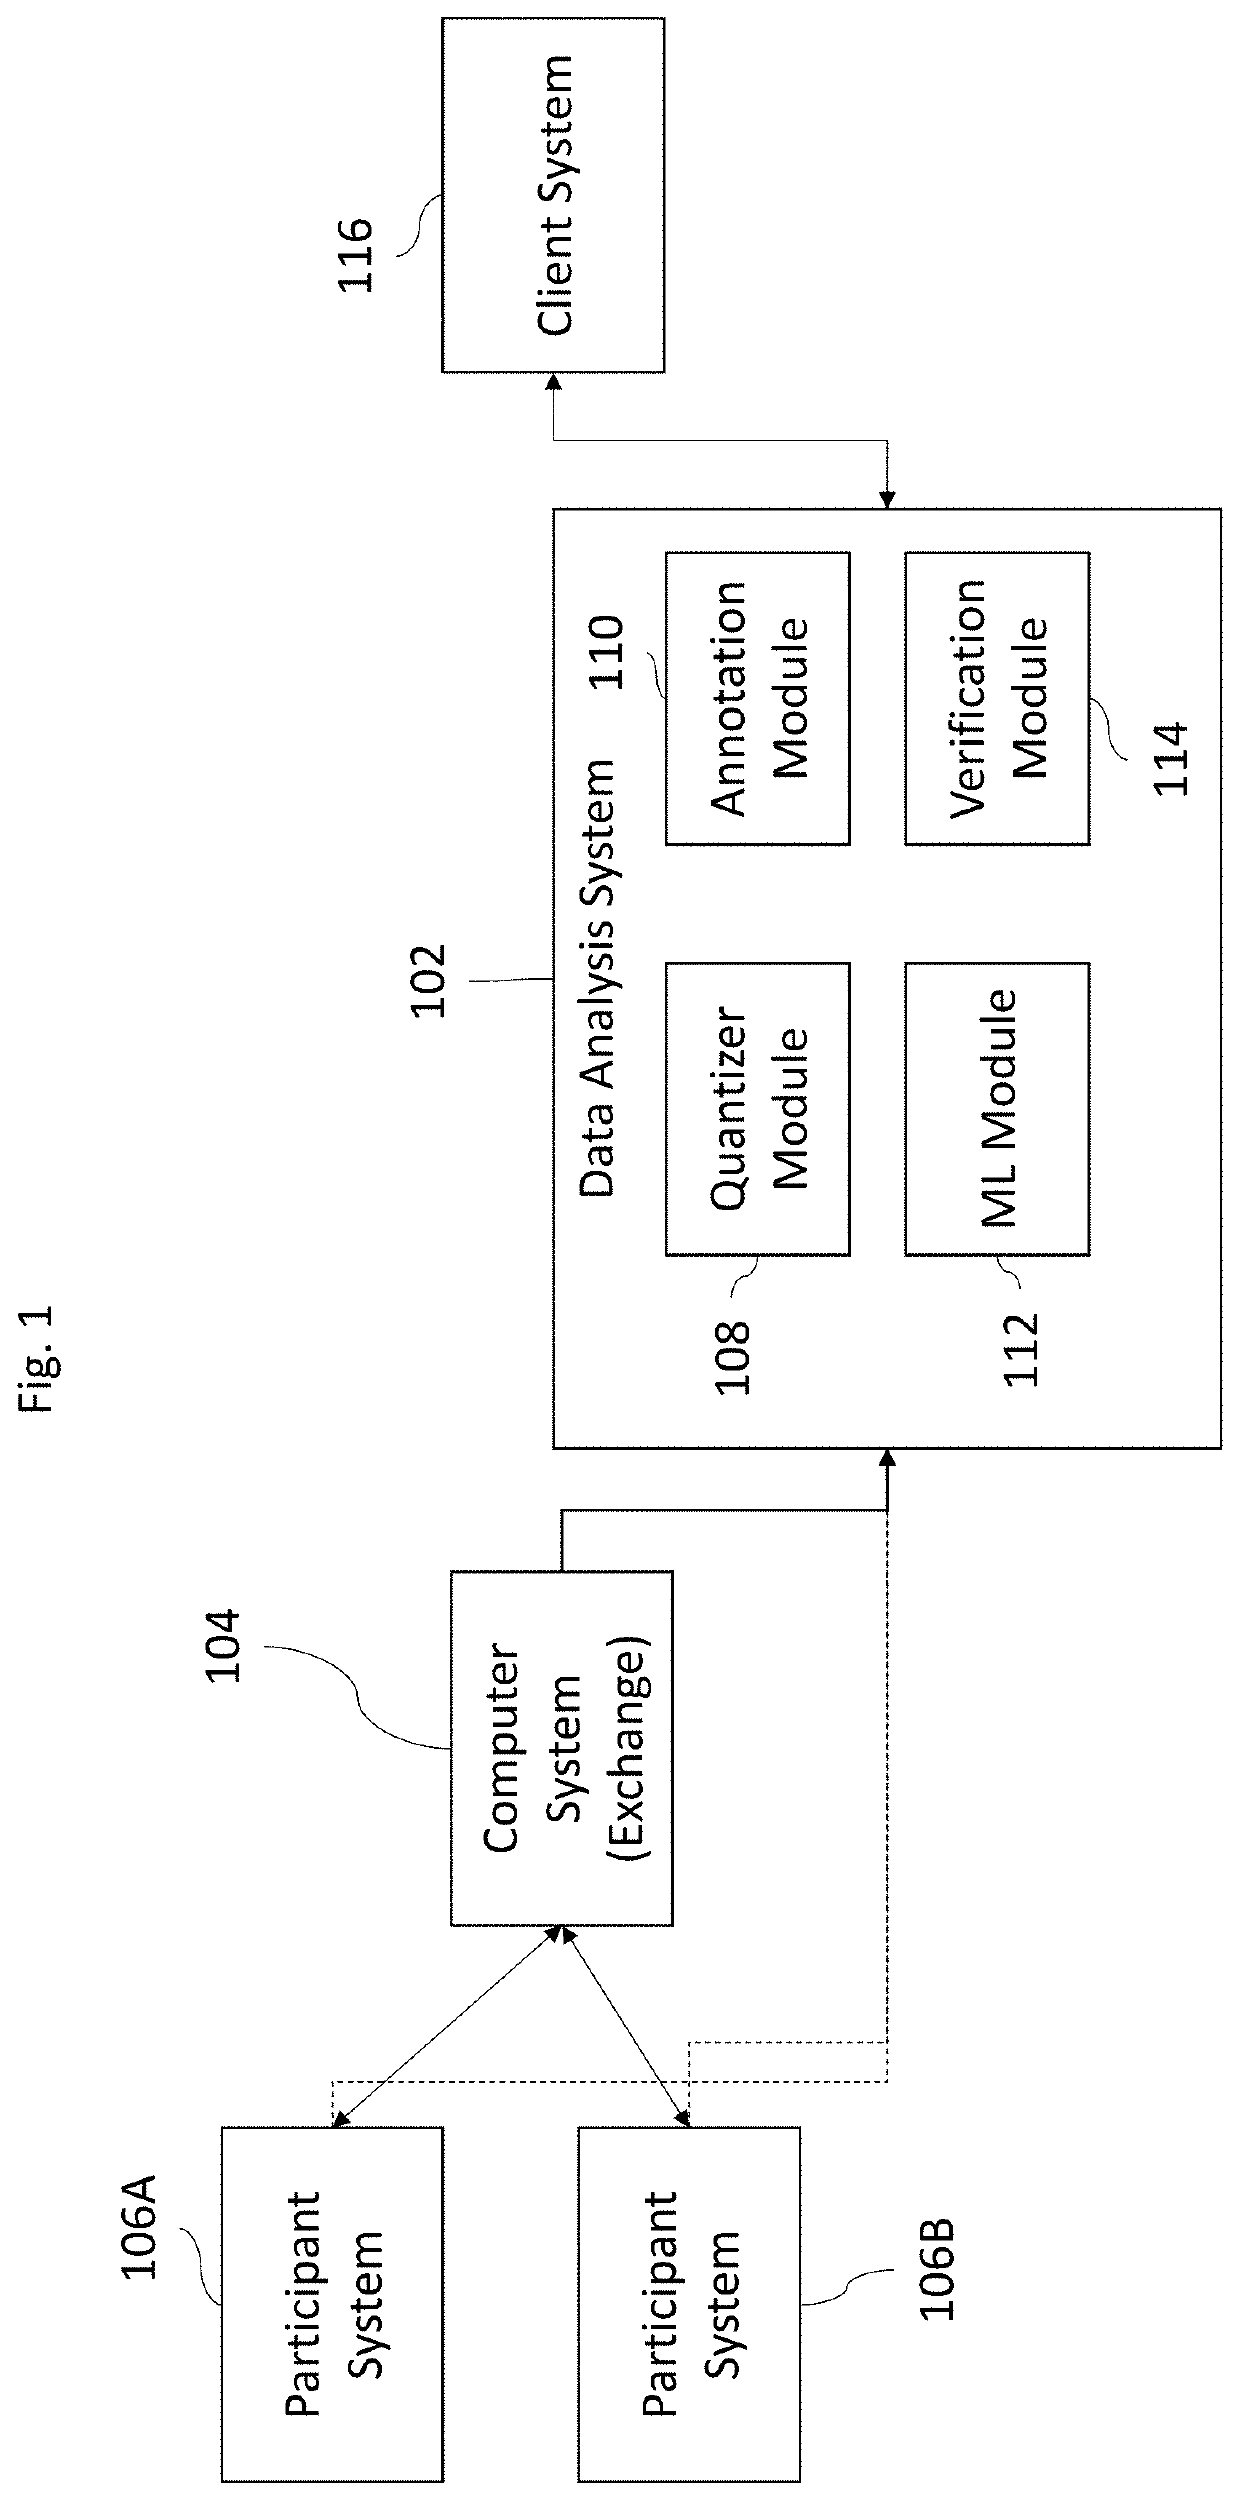 Systems and methods of windowing time series data for pattern detection